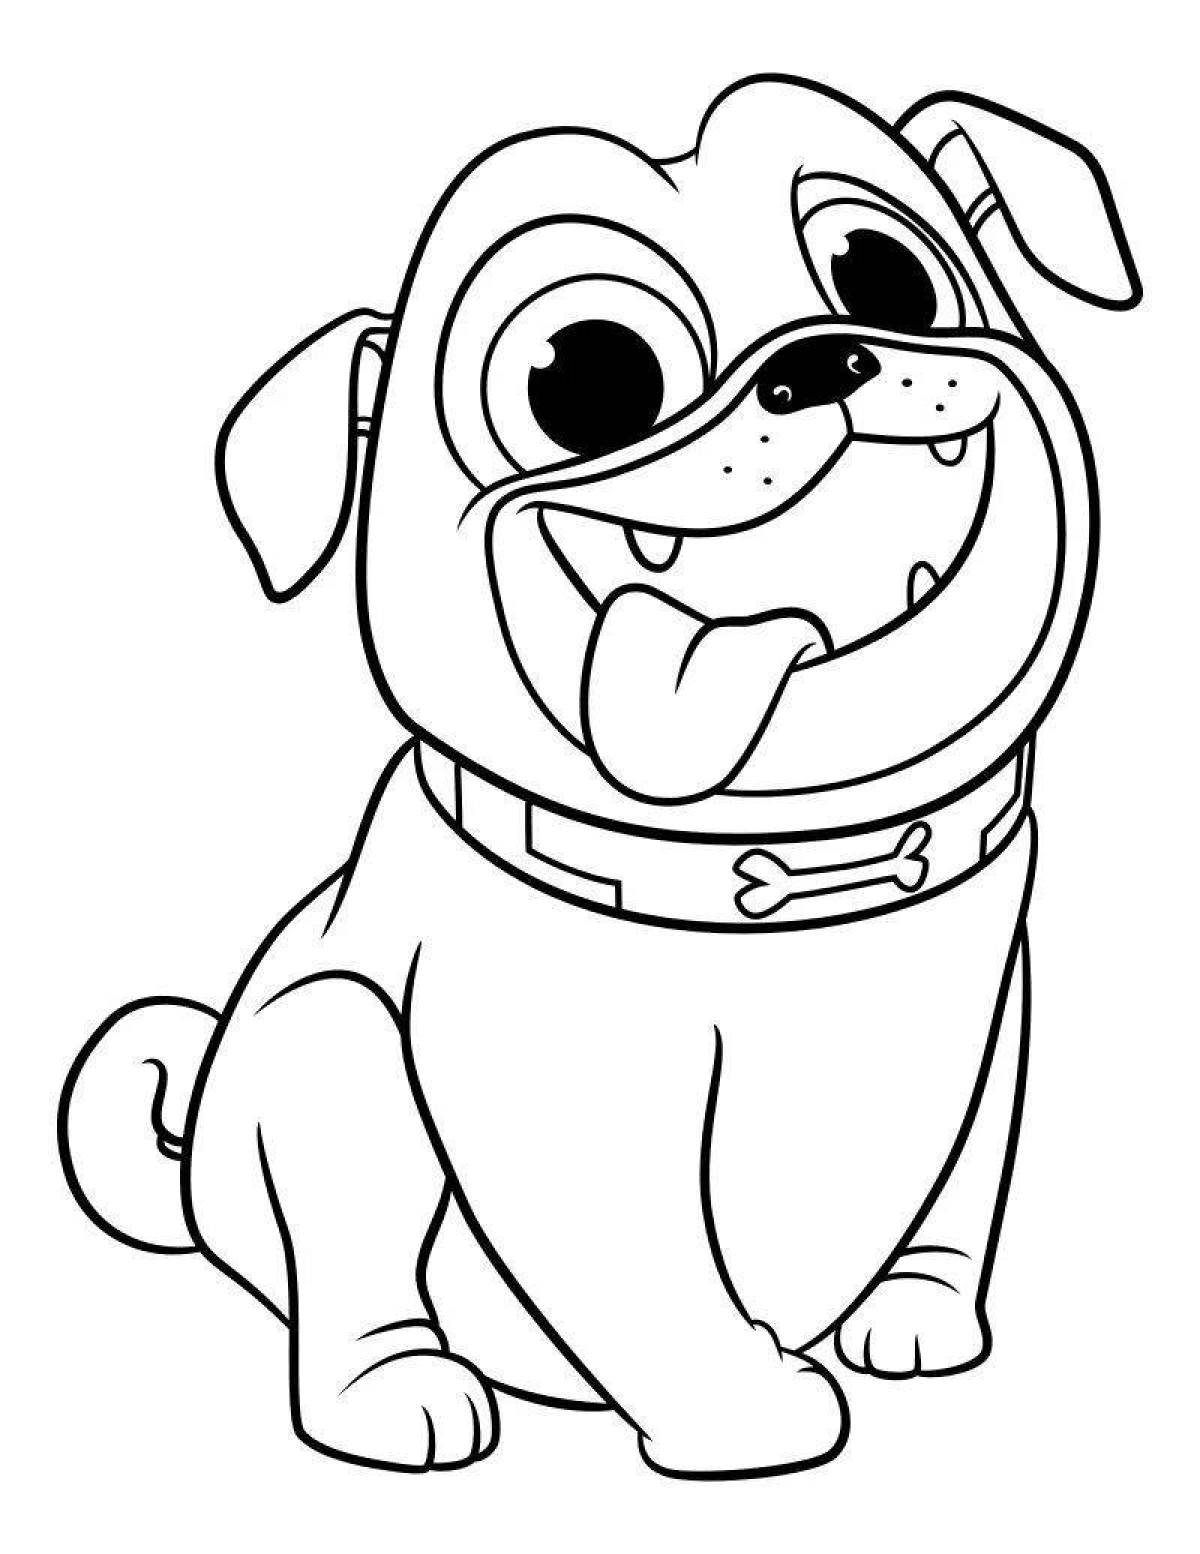 Animated dog boy coloring book